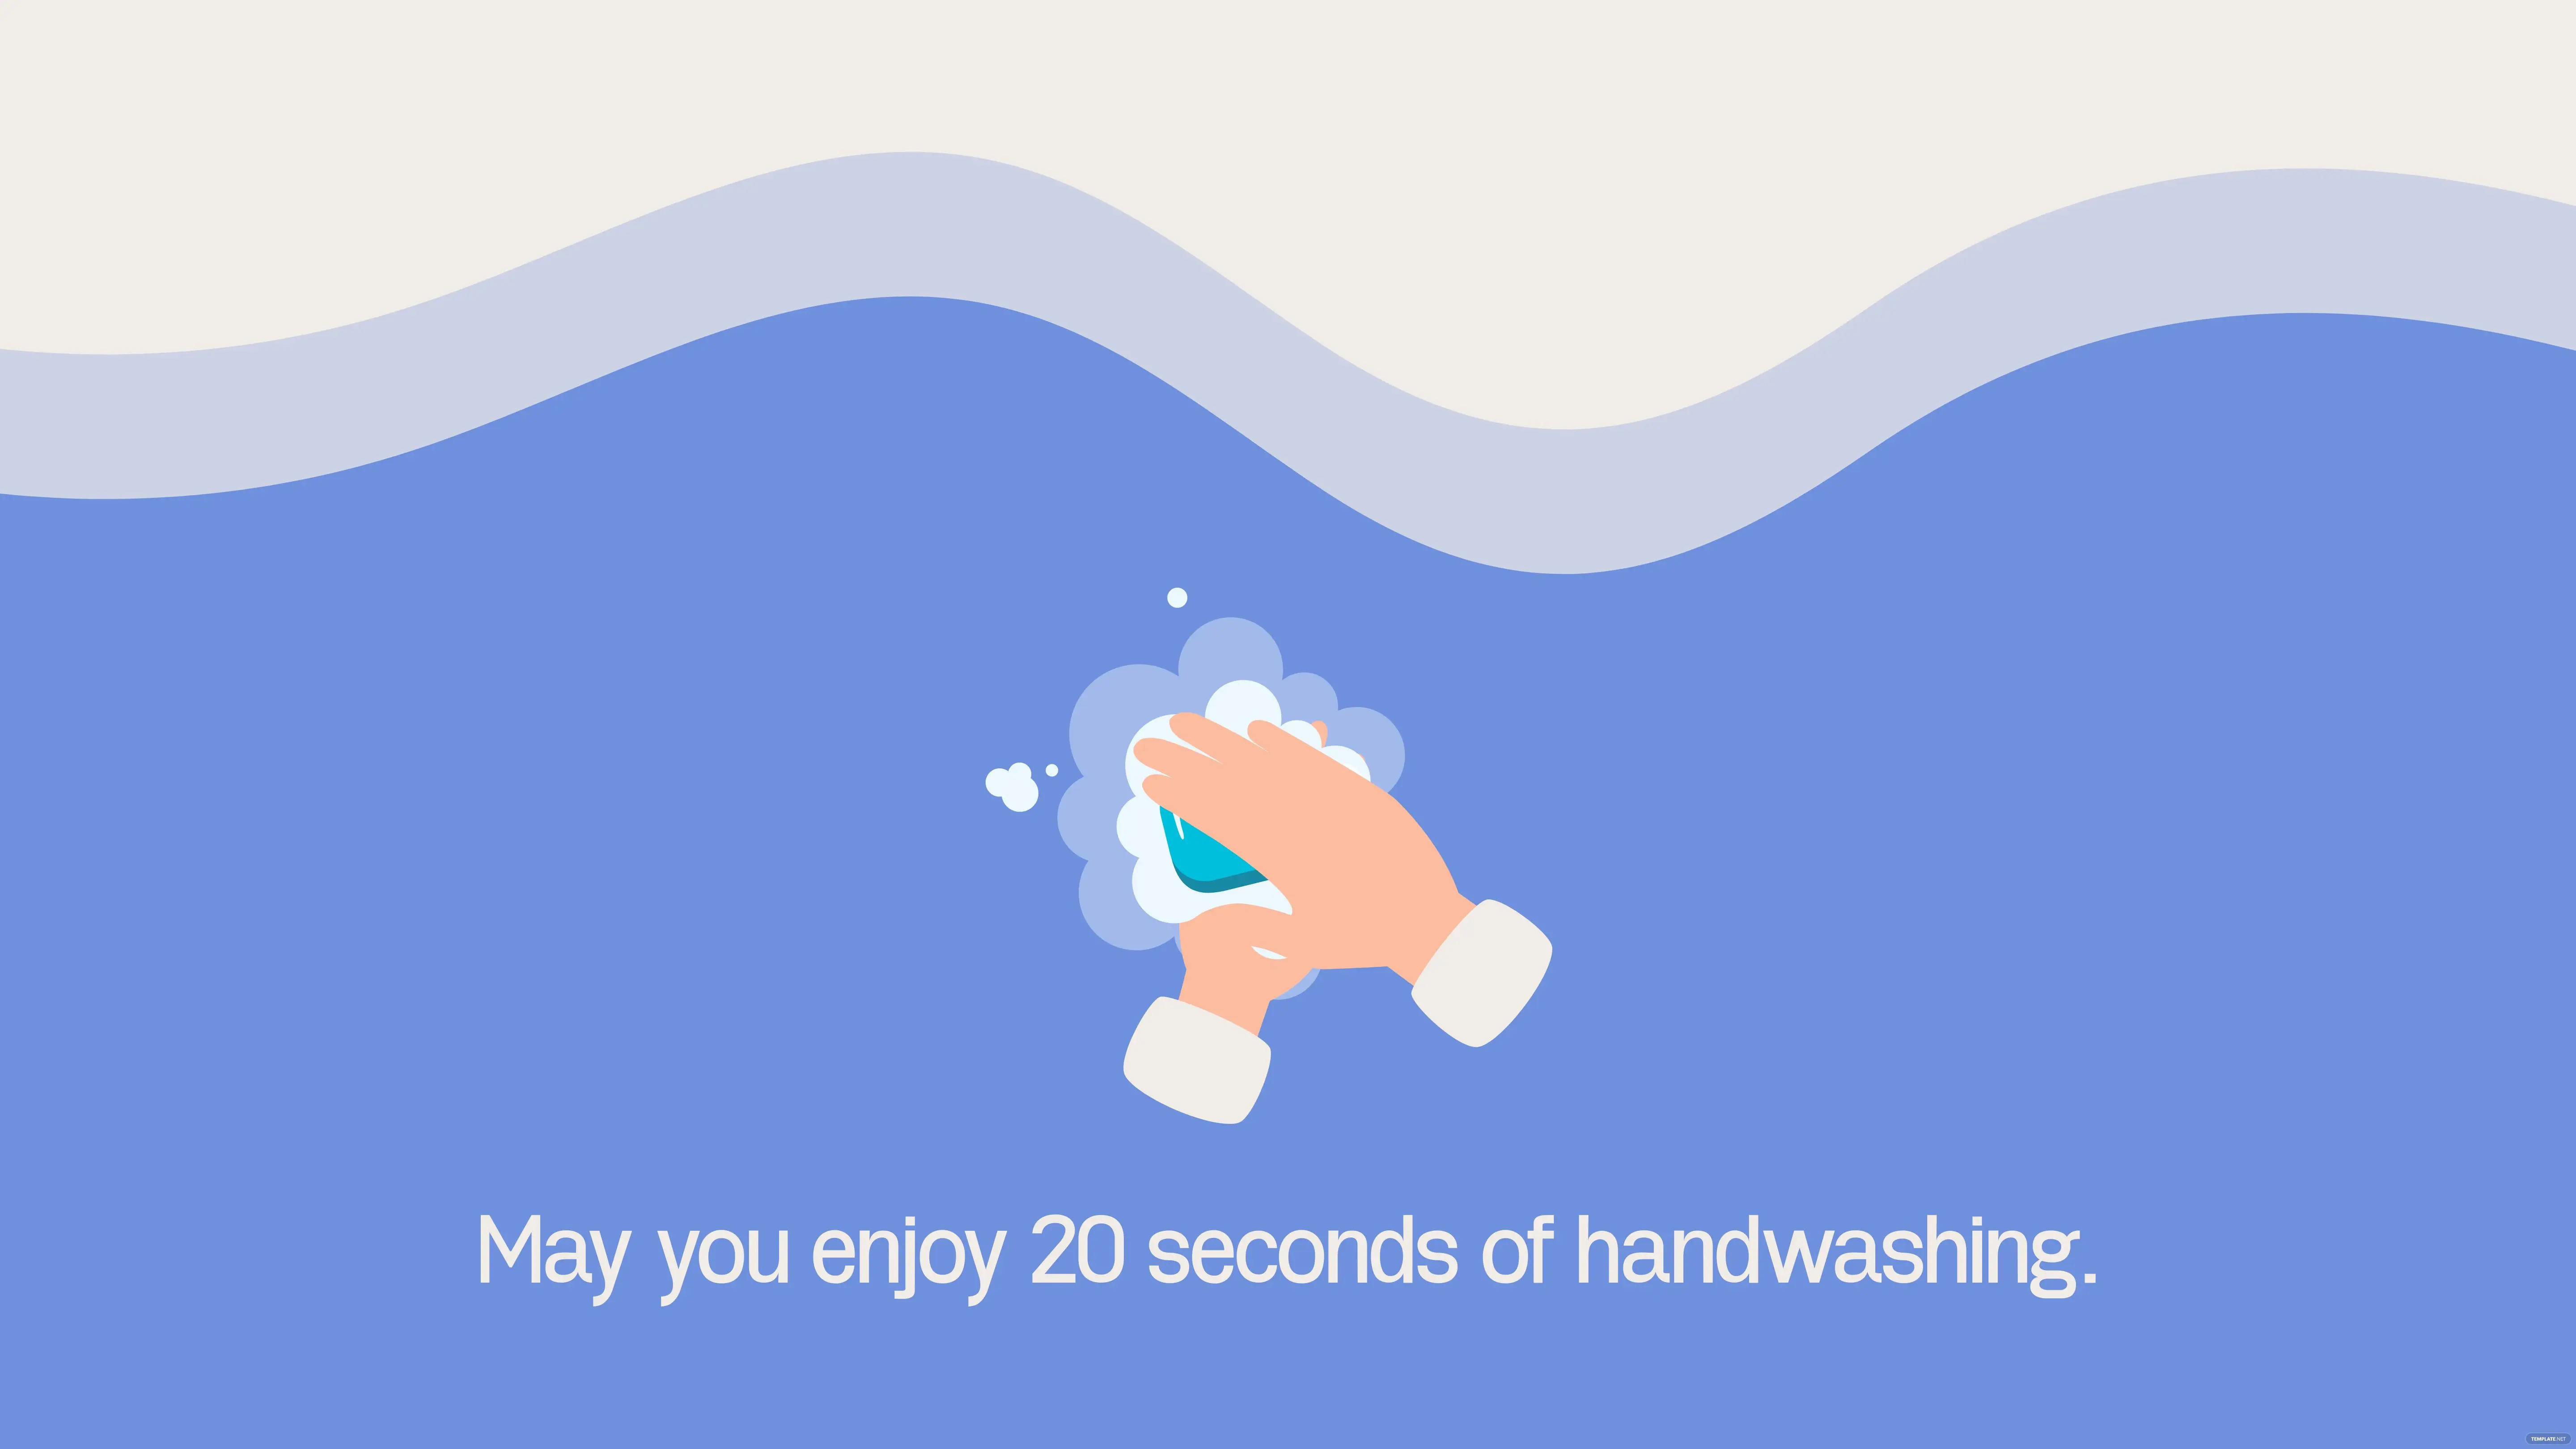 global handwashing day greeting card background ideas and examples